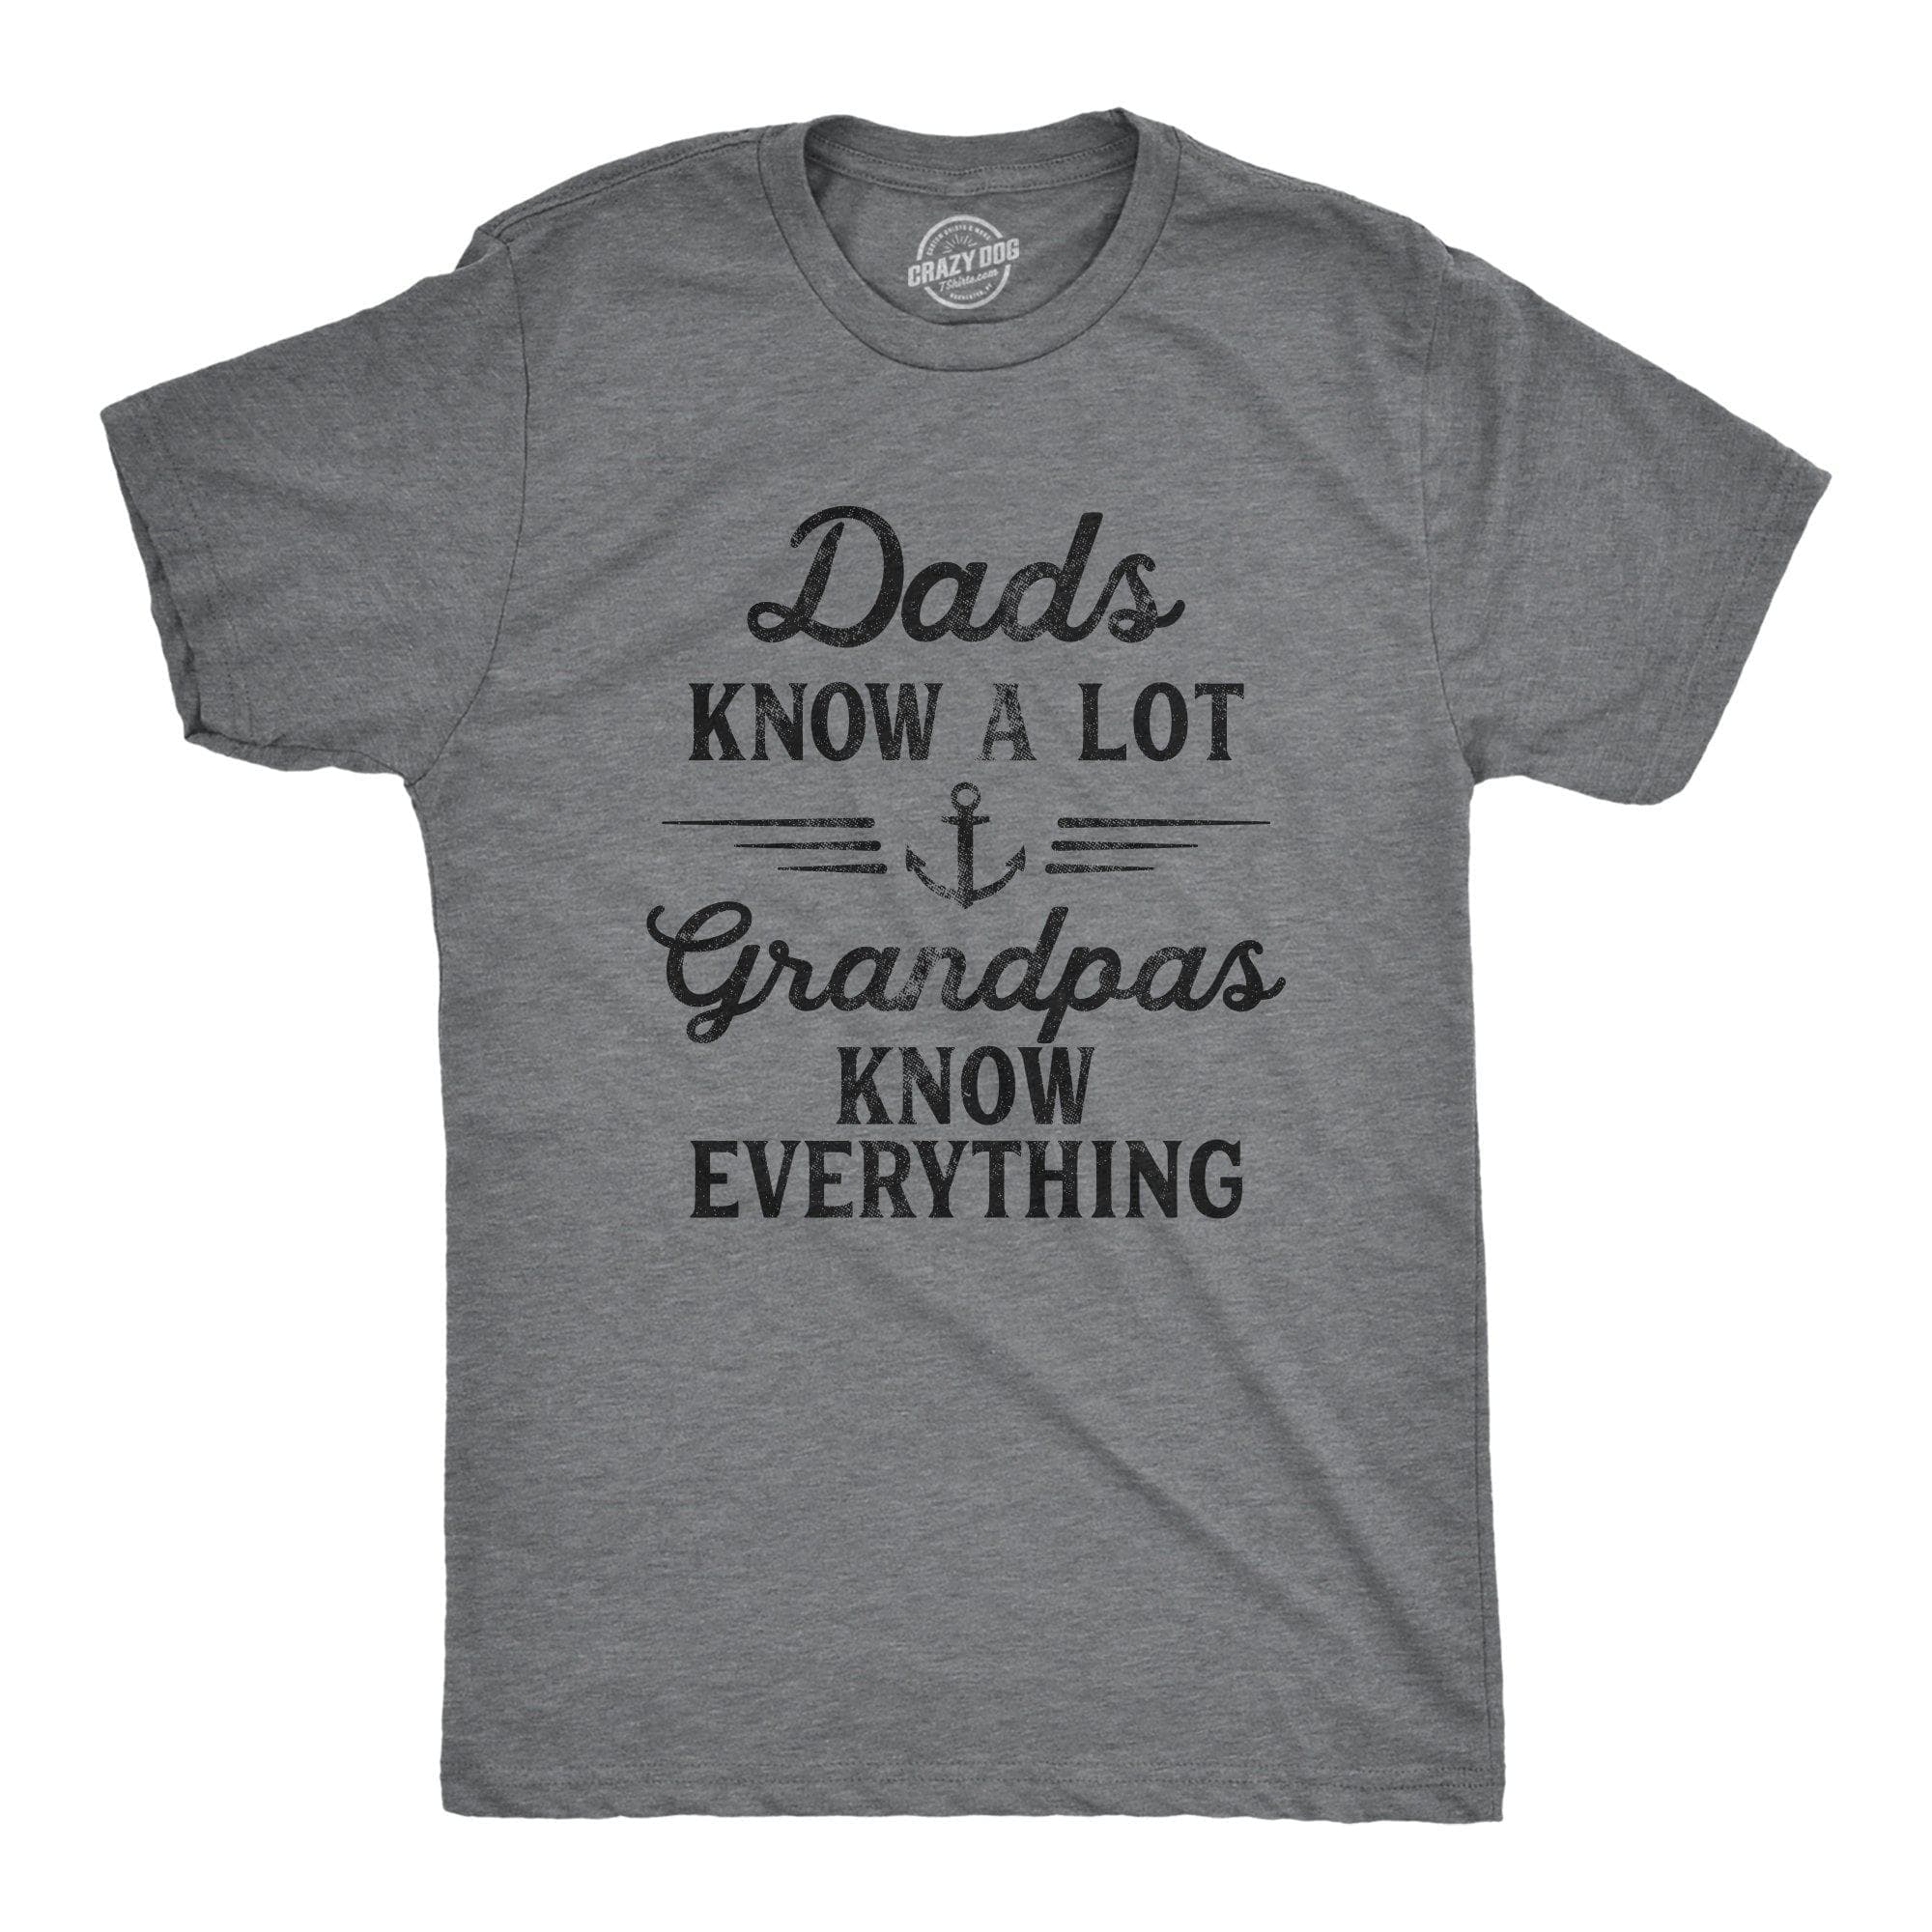 Dad Knows A Lot Grandpas Know Everything Men's Tshirt - Crazy Dog T-Shirts